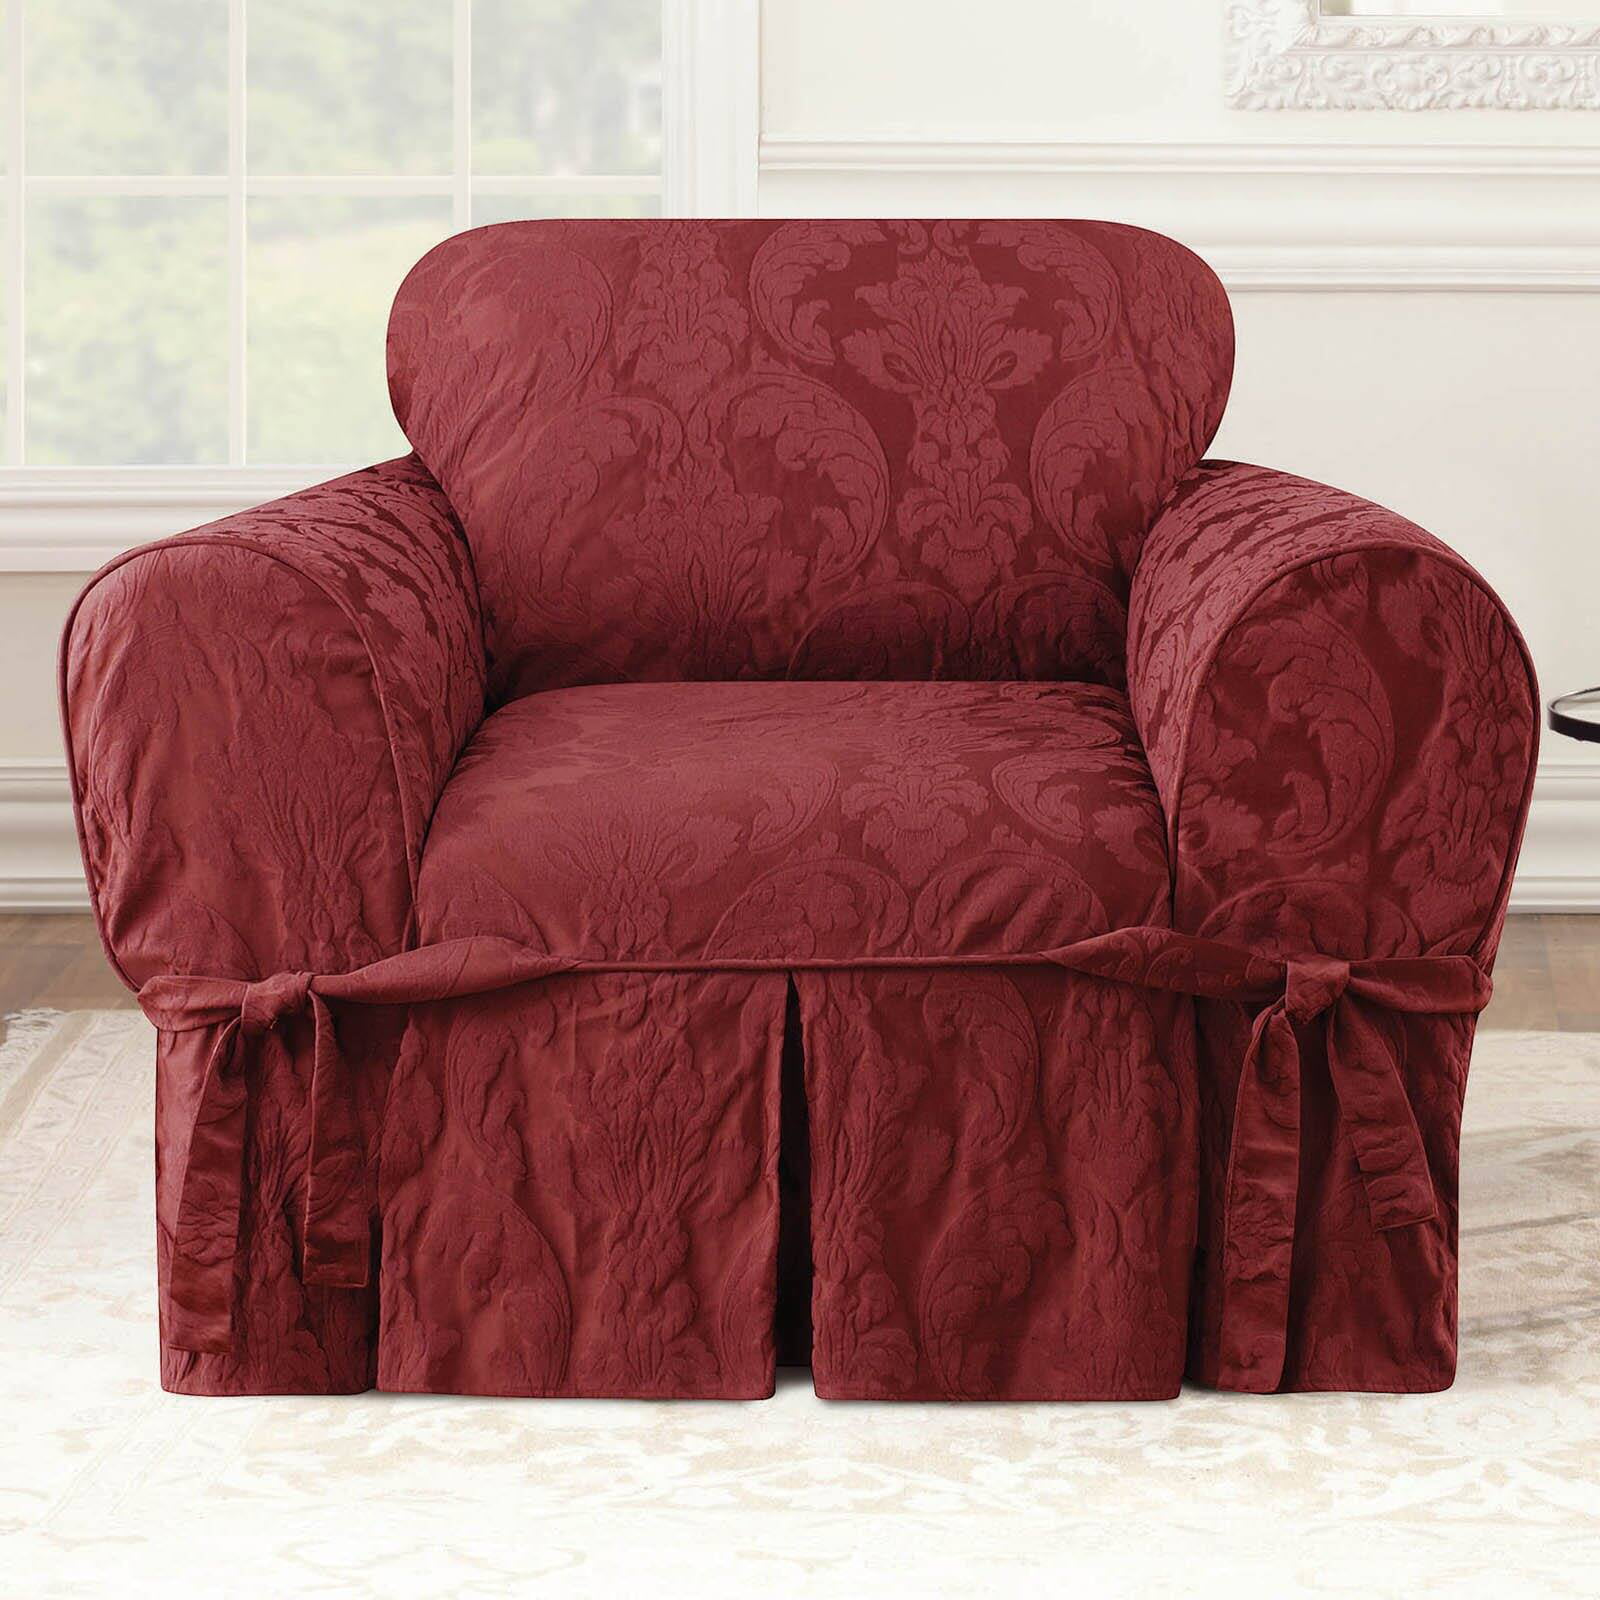 Sure Fit Matelasse Damask Chair Cover, Sure Fit Matelasse Damask Arm Long Dining Room Chair Cover